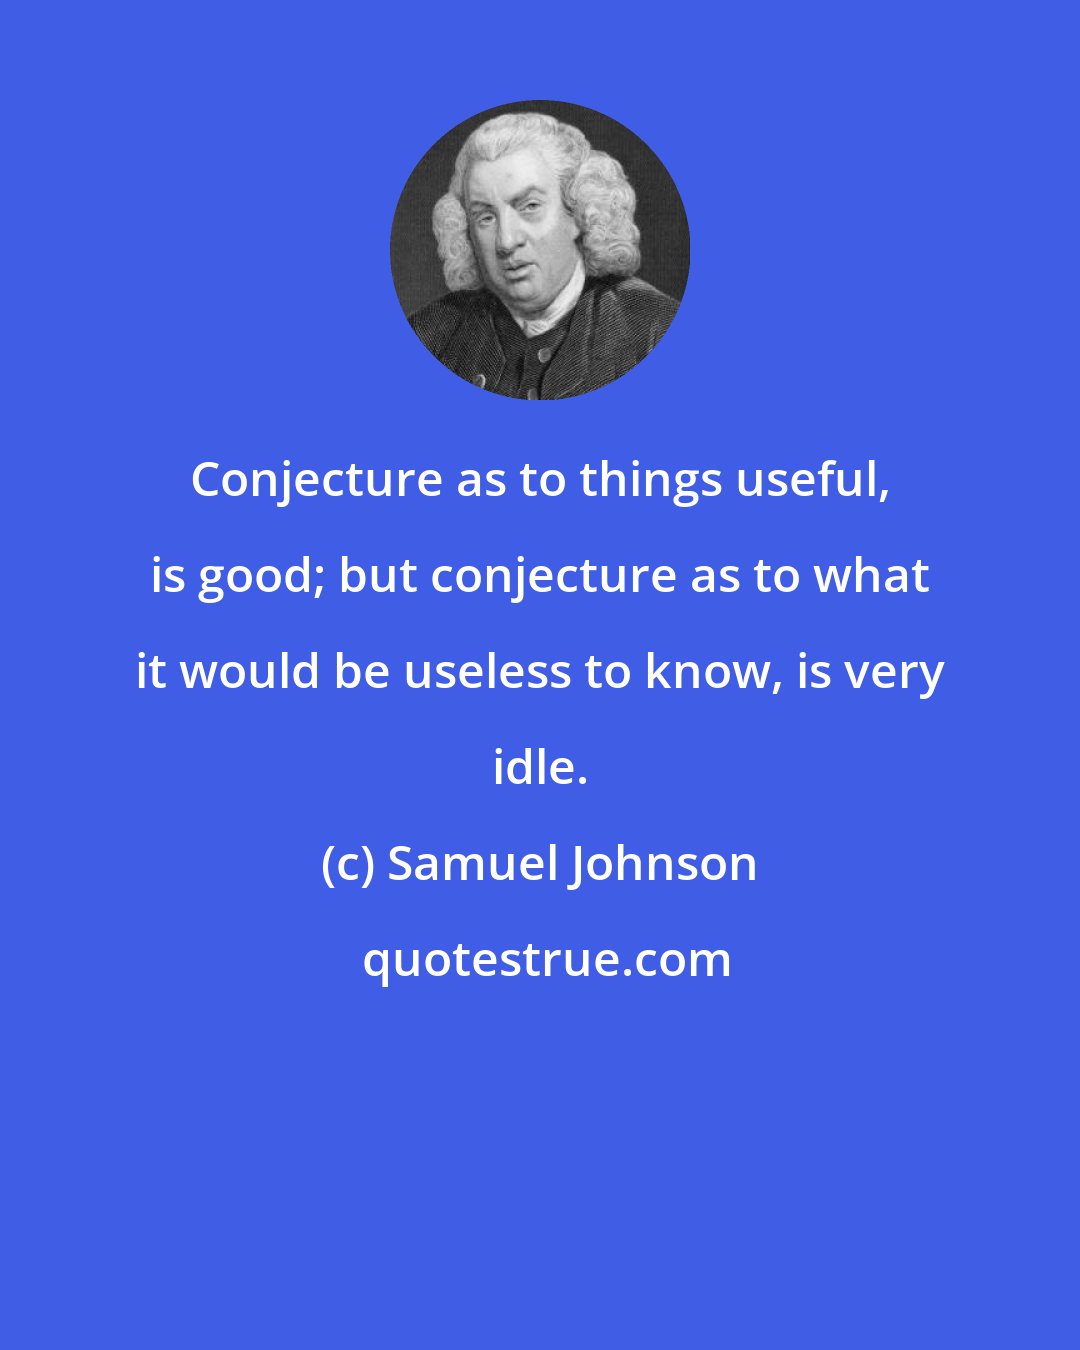 Samuel Johnson: Conjecture as to things useful, is good; but conjecture as to what it would be useless to know, is very idle.